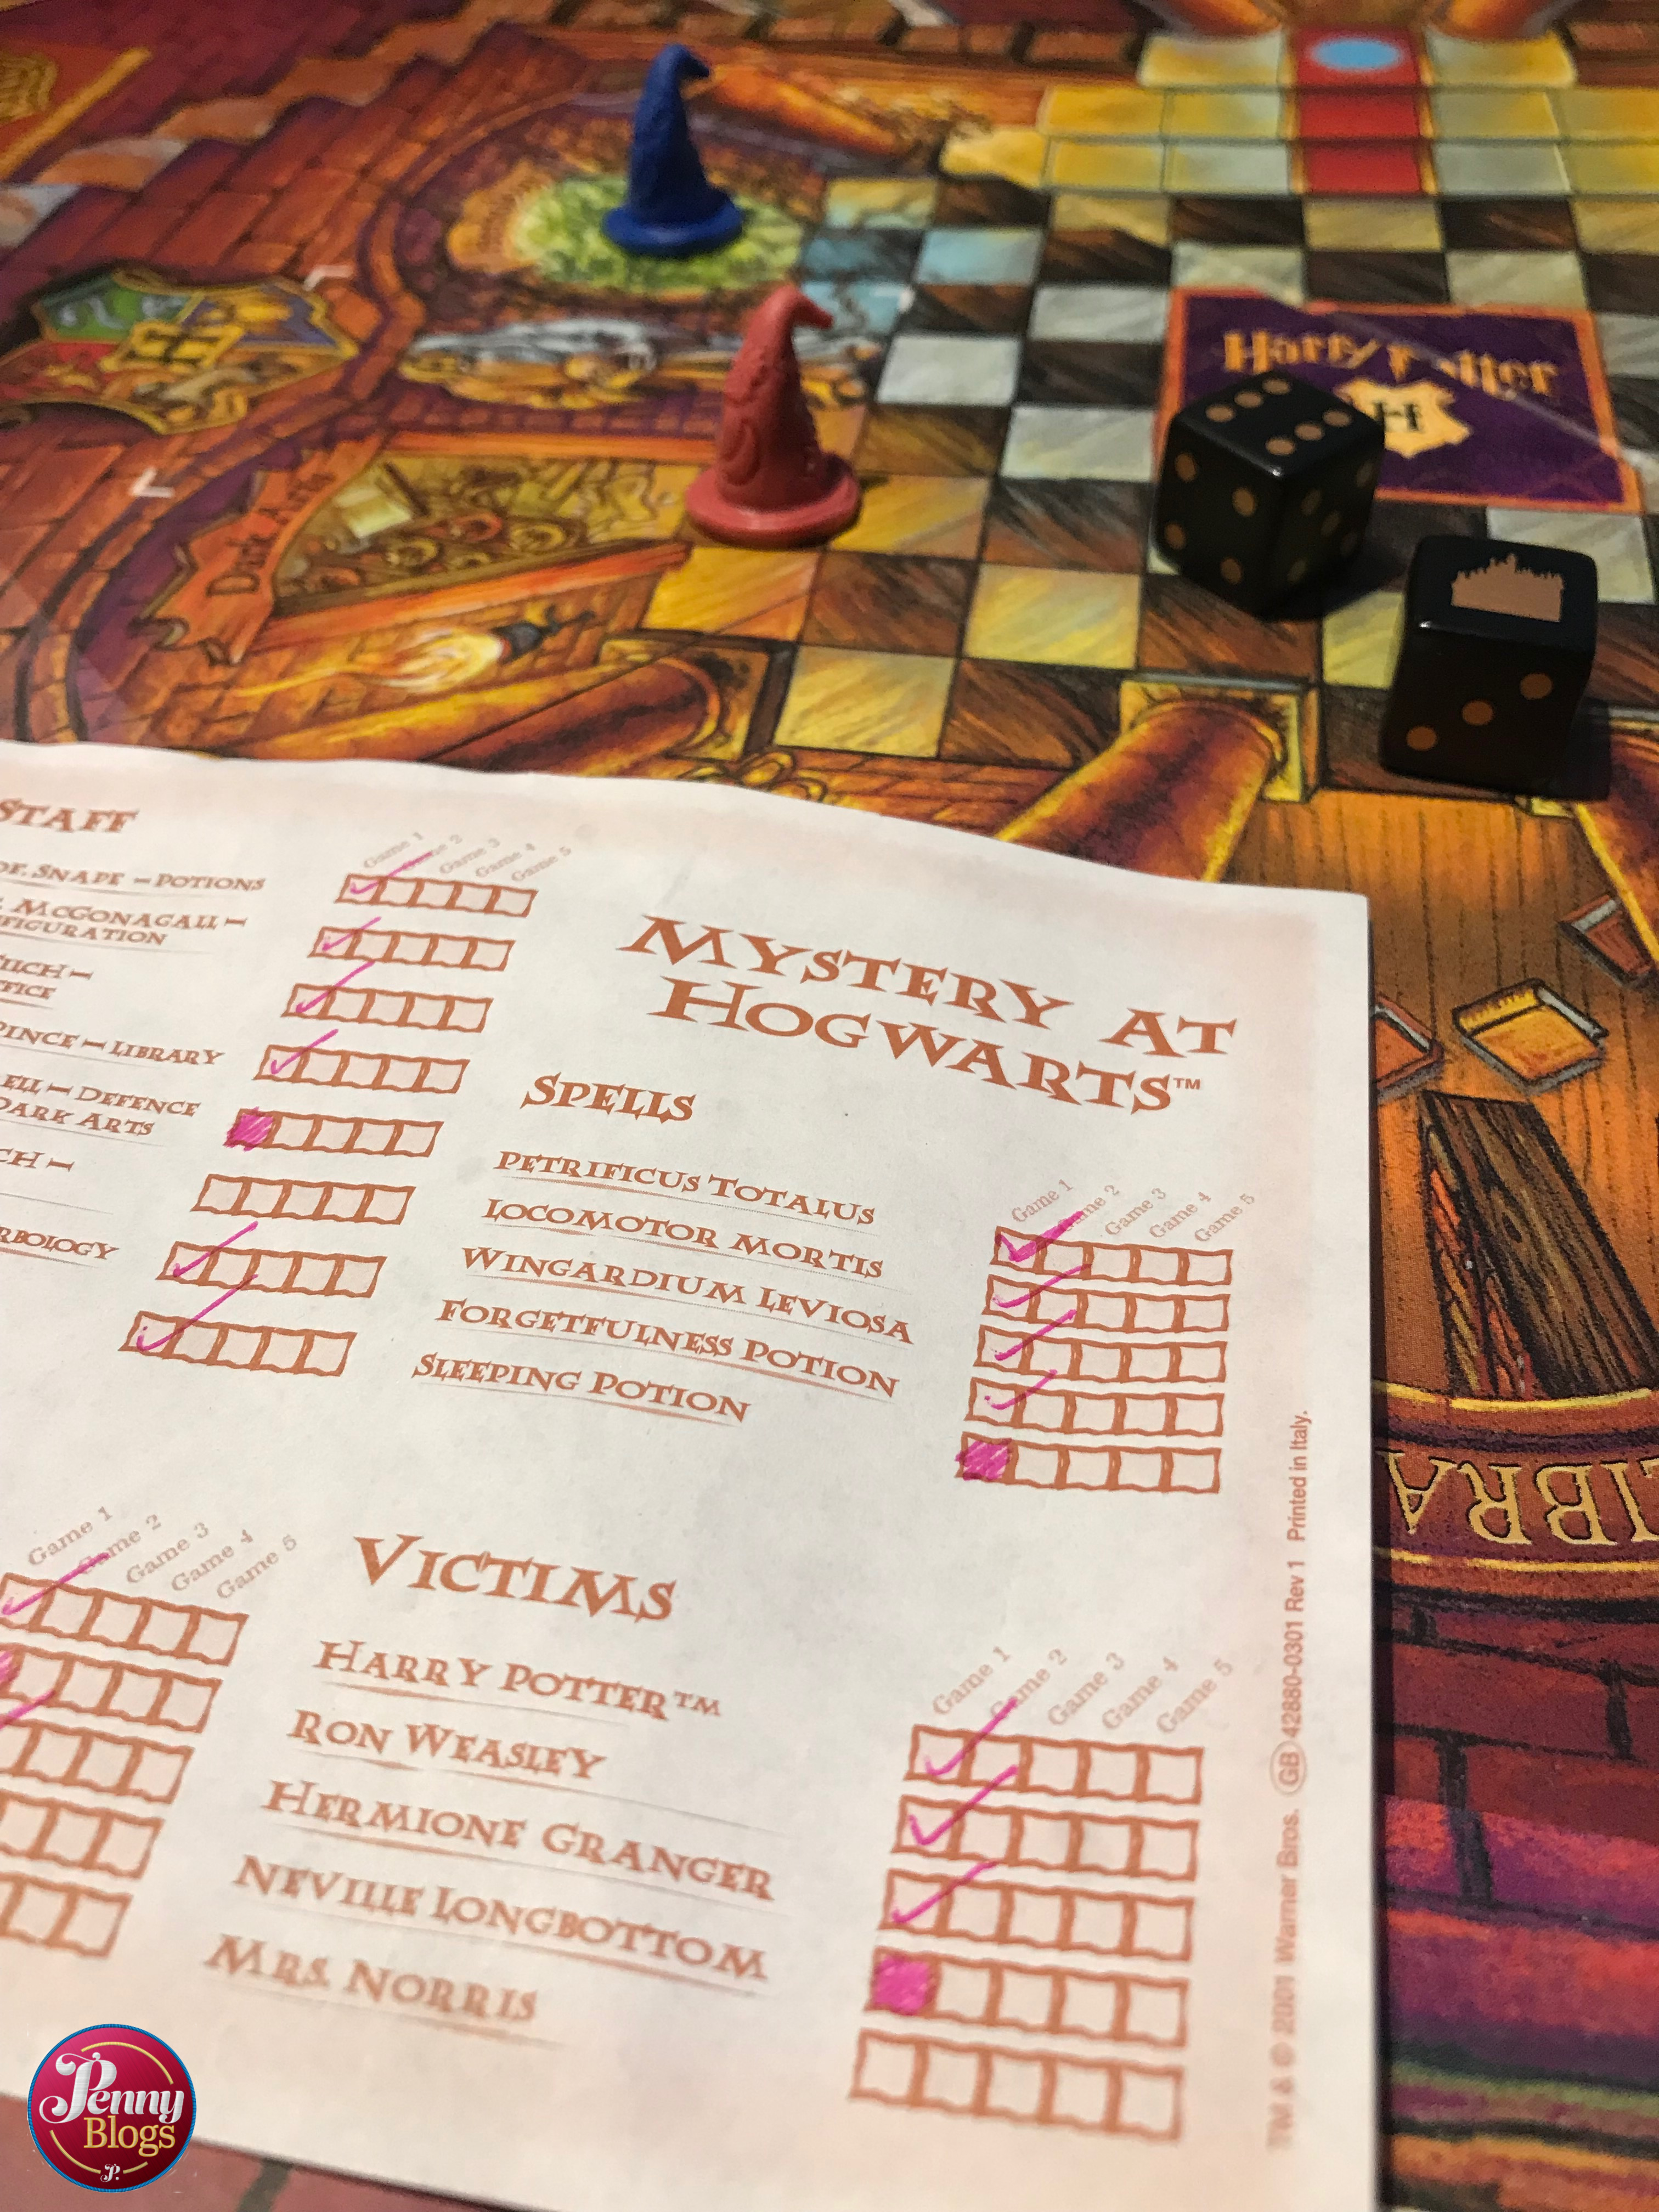 Mystery At Hogwarts Board Game Review Harry Potter and the Philosophers  Stone